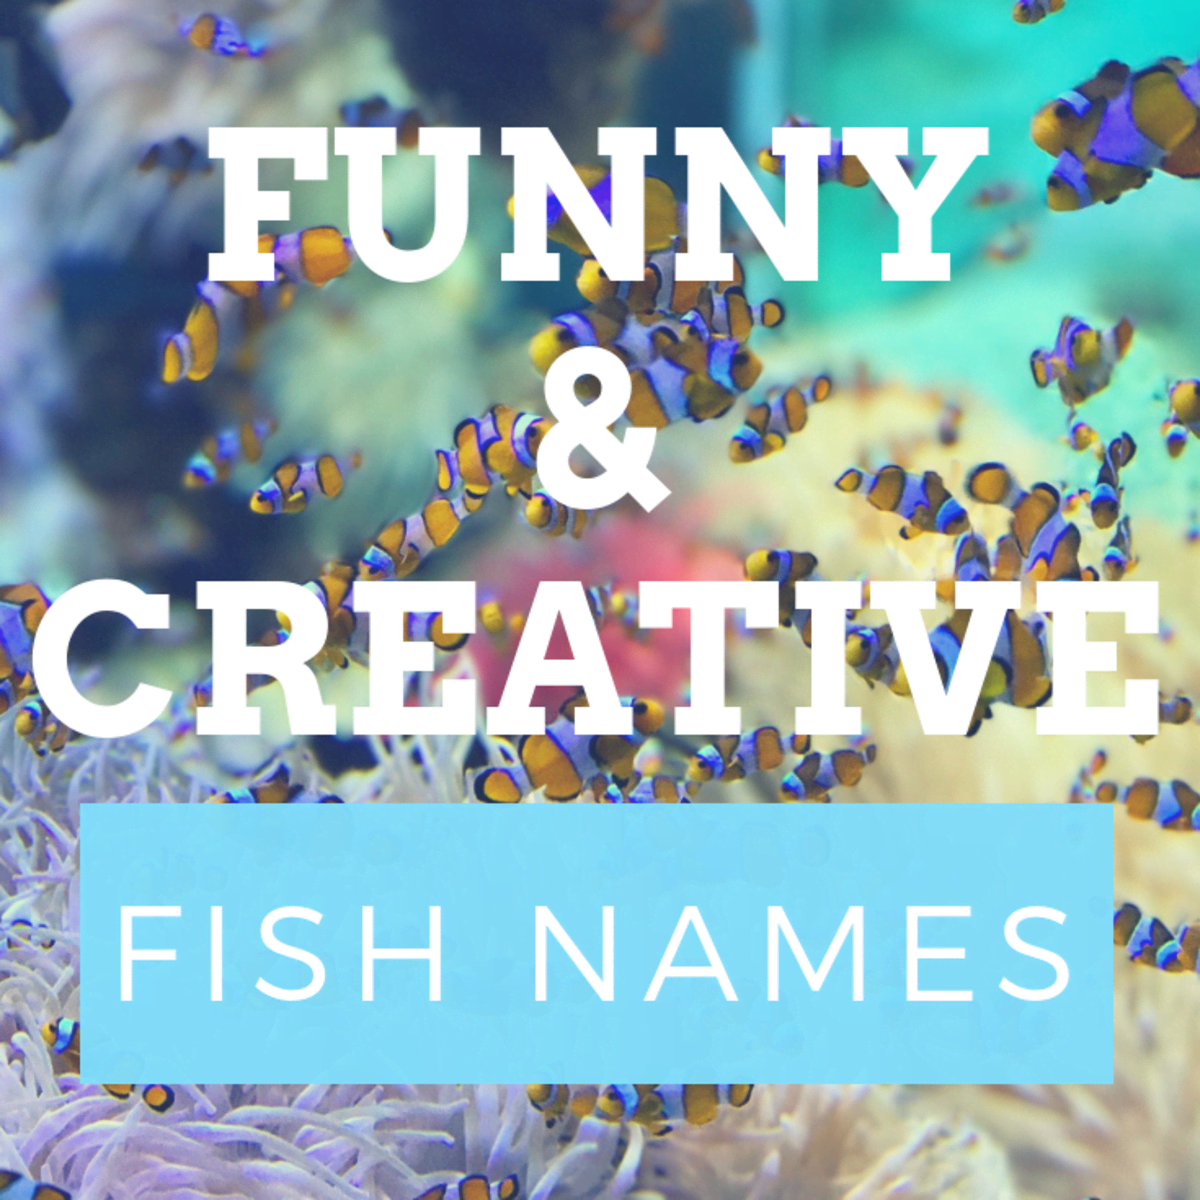 300+ Funny and Clever Fish Names - PetHelpful